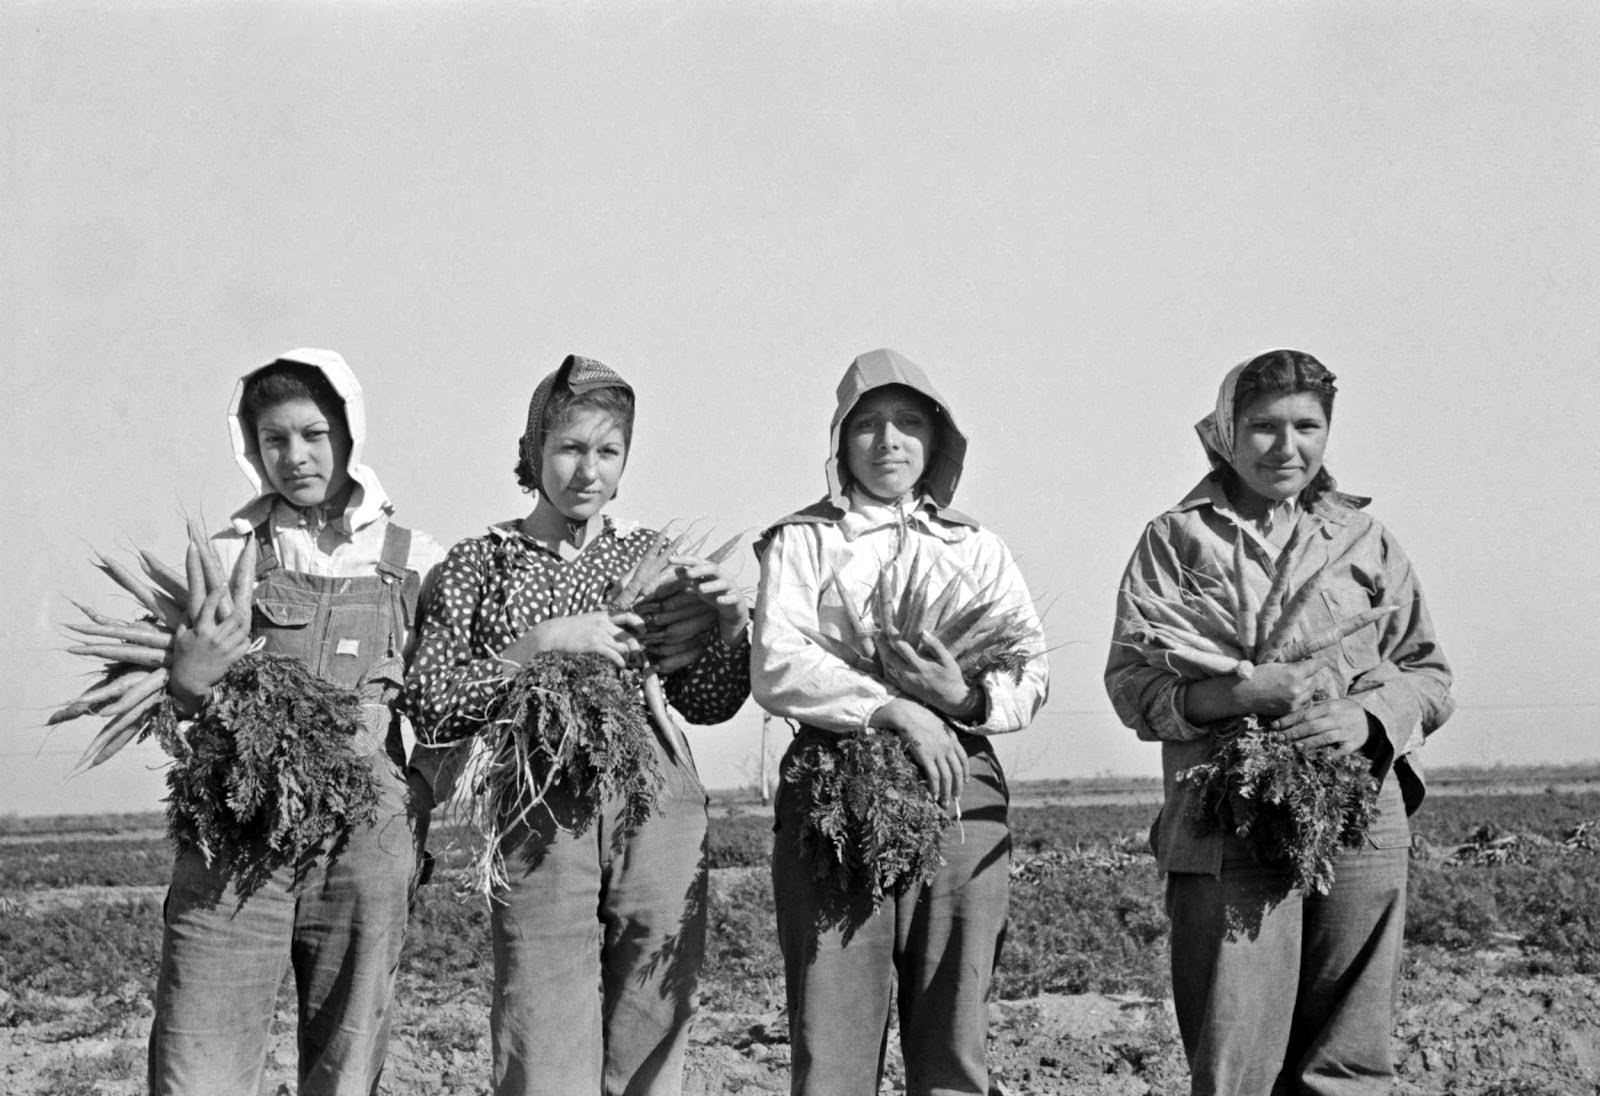 Mexican girls hired to pick fields in Texas, US in 1939. The labor would be cheaper, and Southern US farmers would sometimes pay to have them transported to the US to work. Some assume Mexicans have always just hopped illegally across the border looking for work, but long ago, they were paid to come over to work by rich farmers. Such a practice was a form of indentured servitude, and was common. Entire farms in the area during this time would be worked by Mexicans, and for poor wages, making rich farmers richer. This would all change of course with new laws, corporations taking over agriculture, and other major factors that shaped modern farming in the US today.